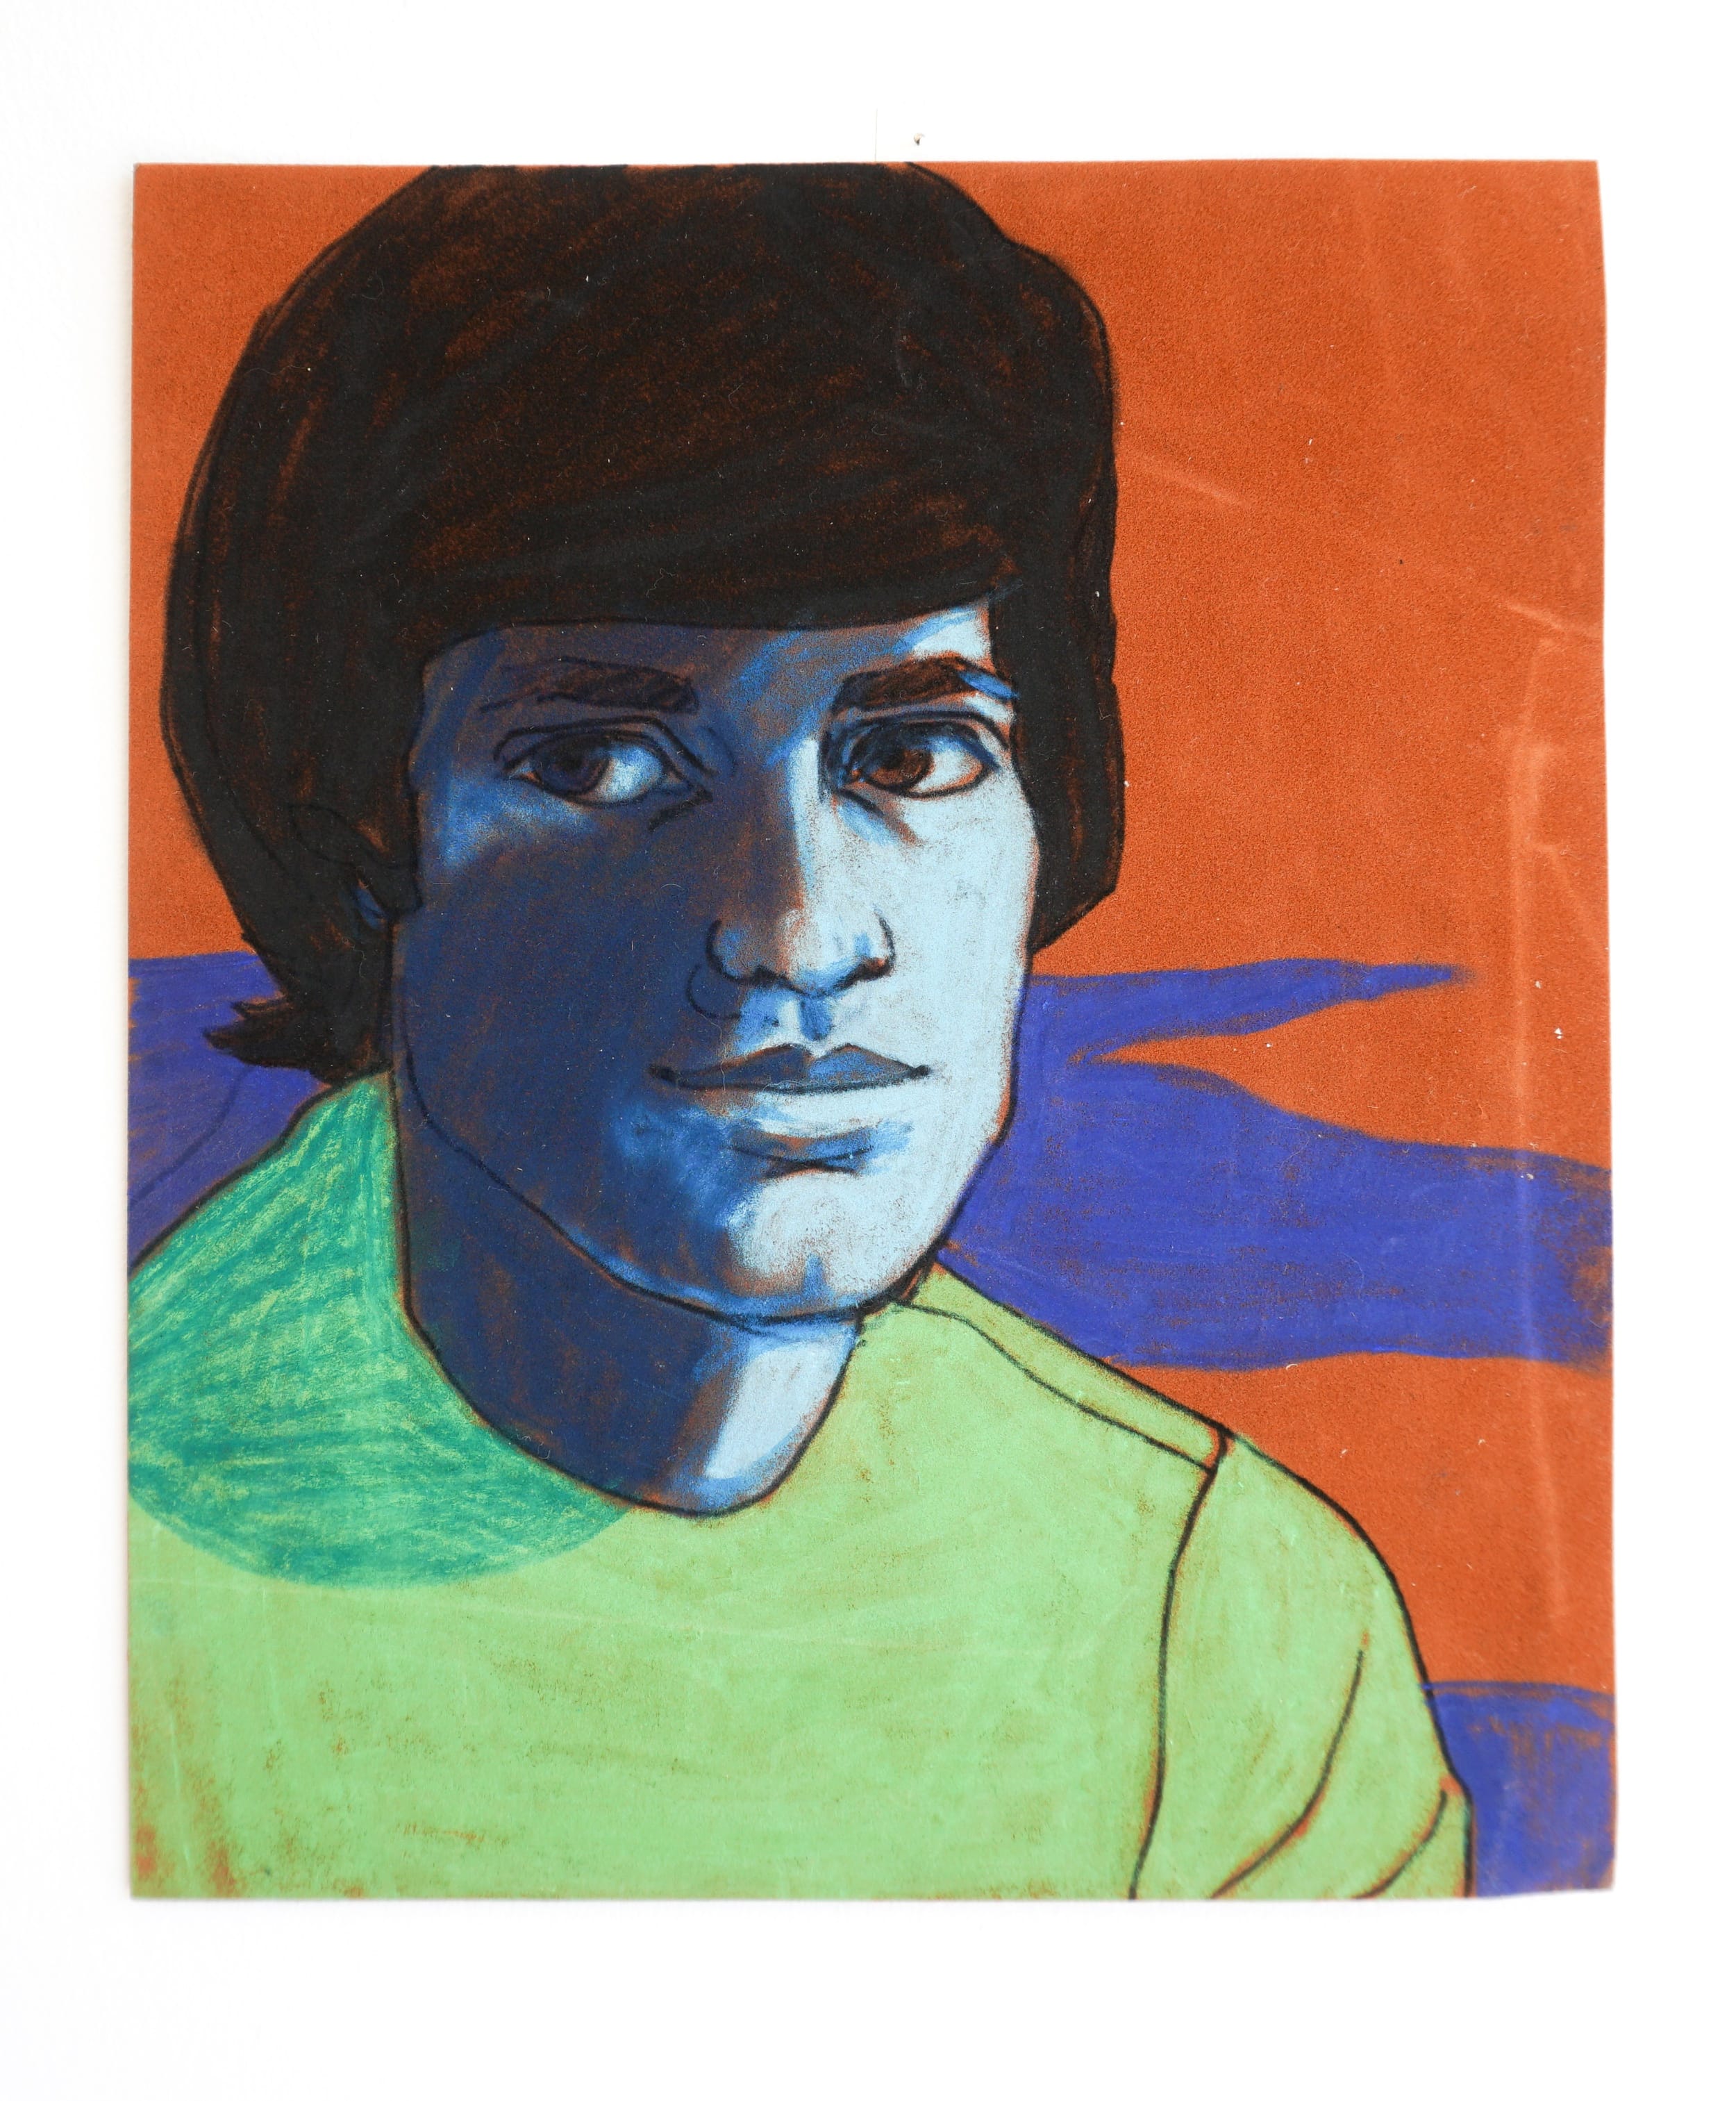  Curt McDowell  Untitled (blue green portrait) , date unknown Pastel, oil paint on velour 10 x 9 inches 